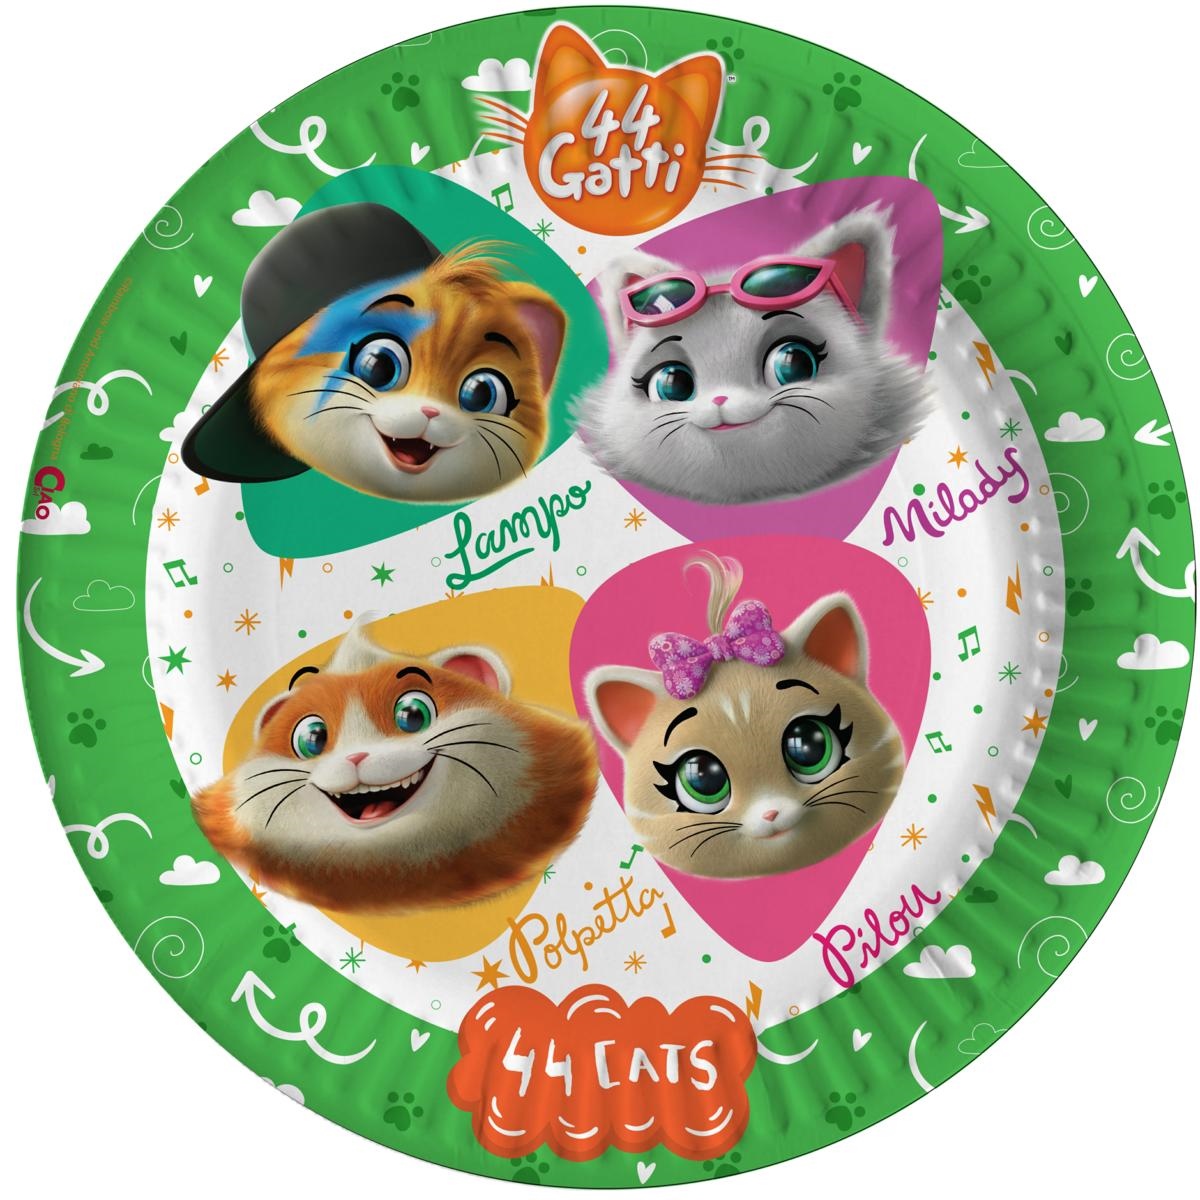  8 Paper Plate 44 Cats  .cm. 23